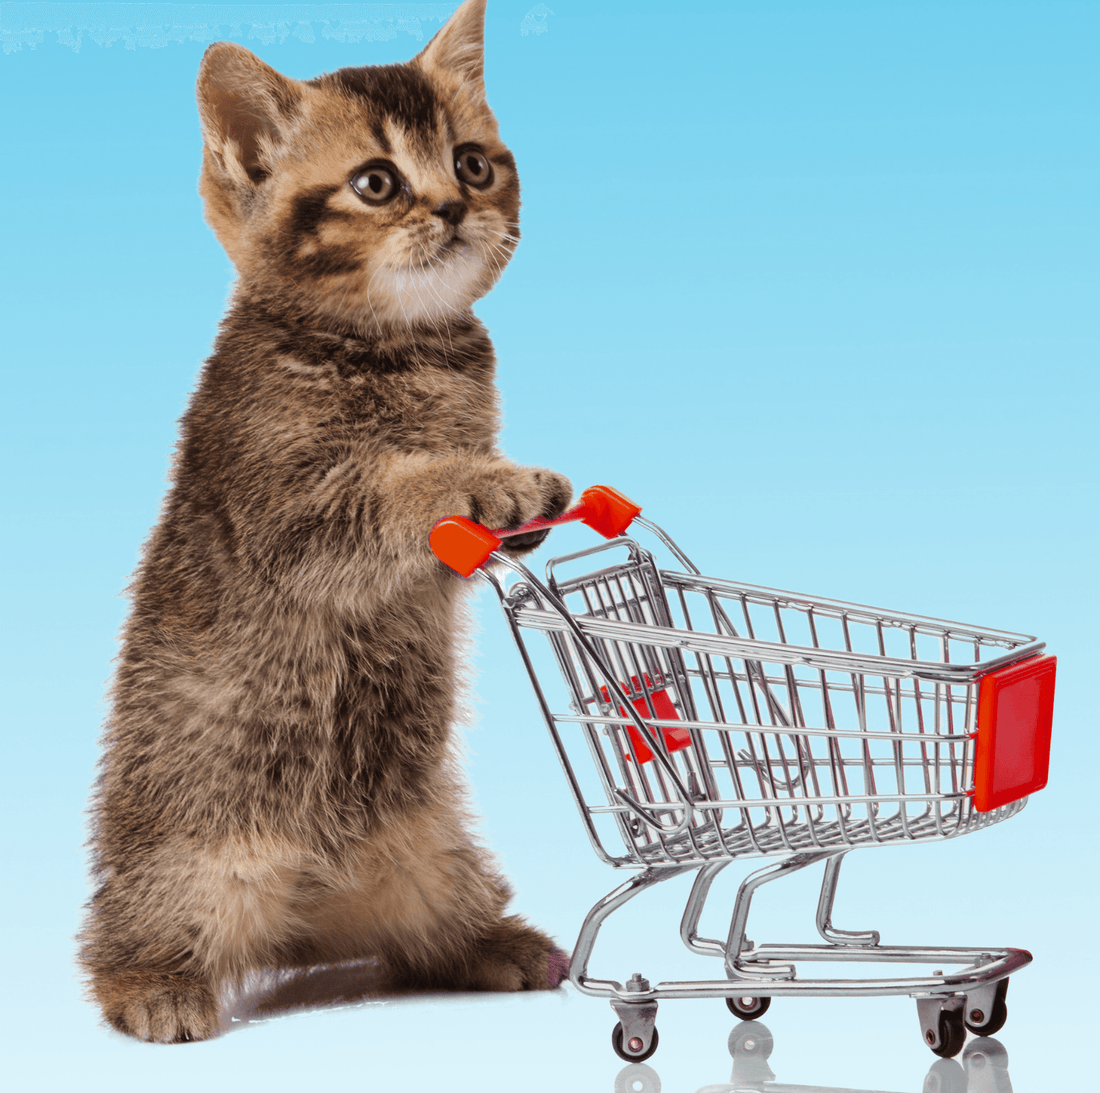 Recommendations On What You Need Before Your New Cat Get Home - PawPawUp